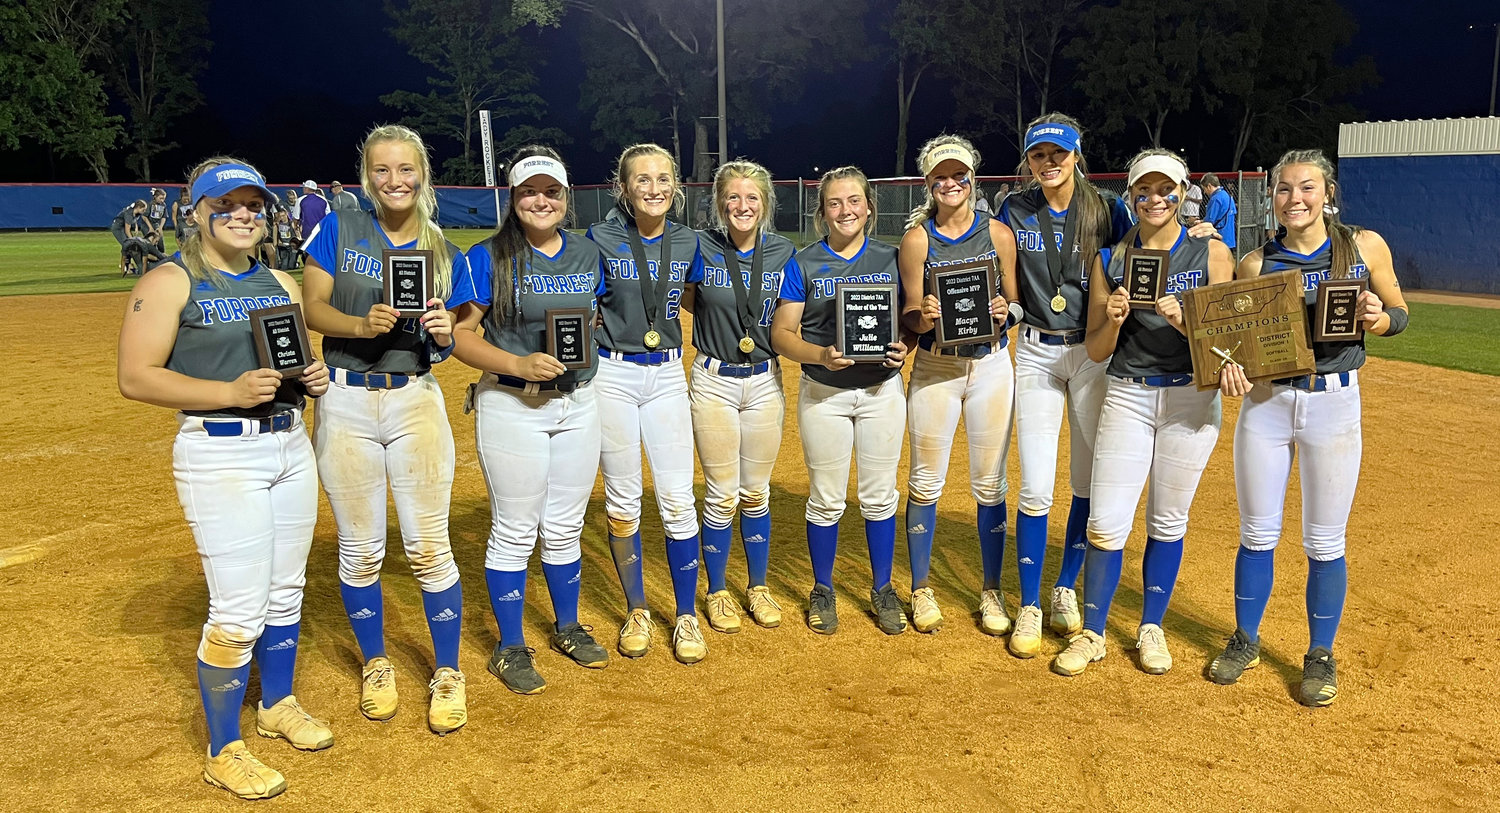 Forrest all-district award winners from left are, Christa Warren, Briley Burnham, Carli Warner, Maggie Daughrity, Parker Wales, Julie Williams (Pitcher of the Year), Macyn Kirby (Offensive Player of the Year), Ella Chilton, Abby Ferguson, and Addison Bunty.